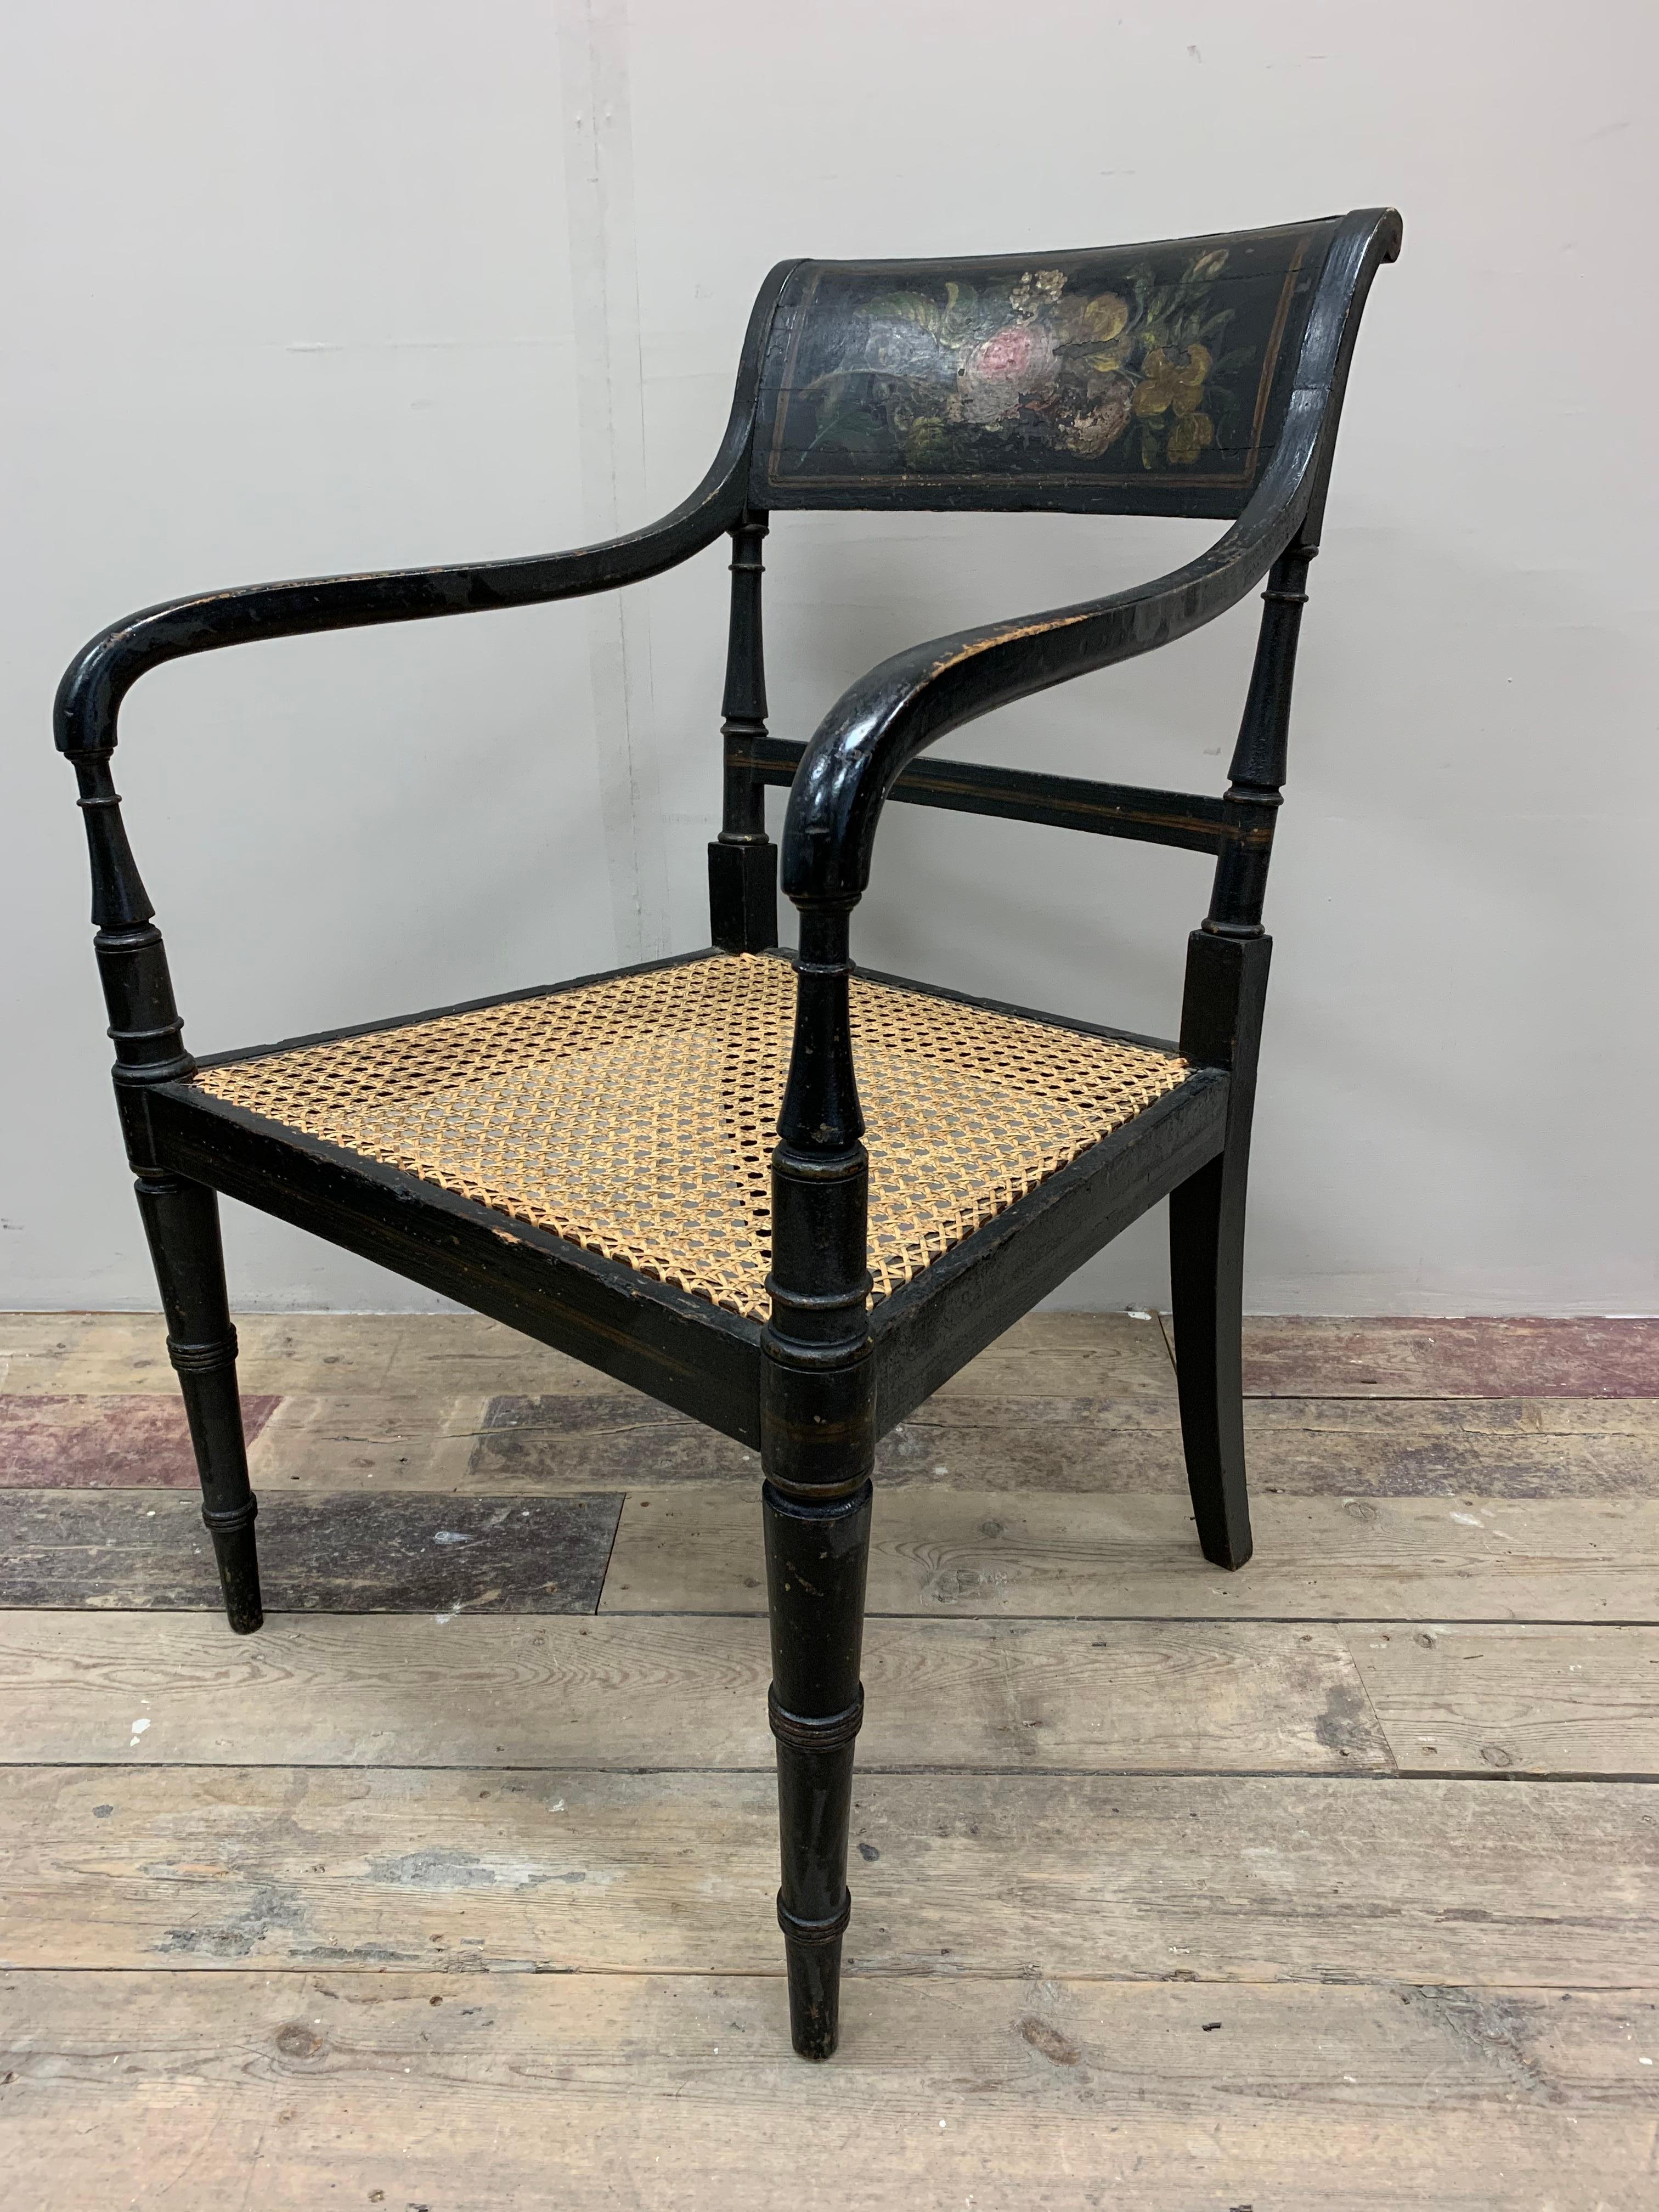 Regency C19th Century English Black Painted Armchair with Flower Decoration & Caned Seat